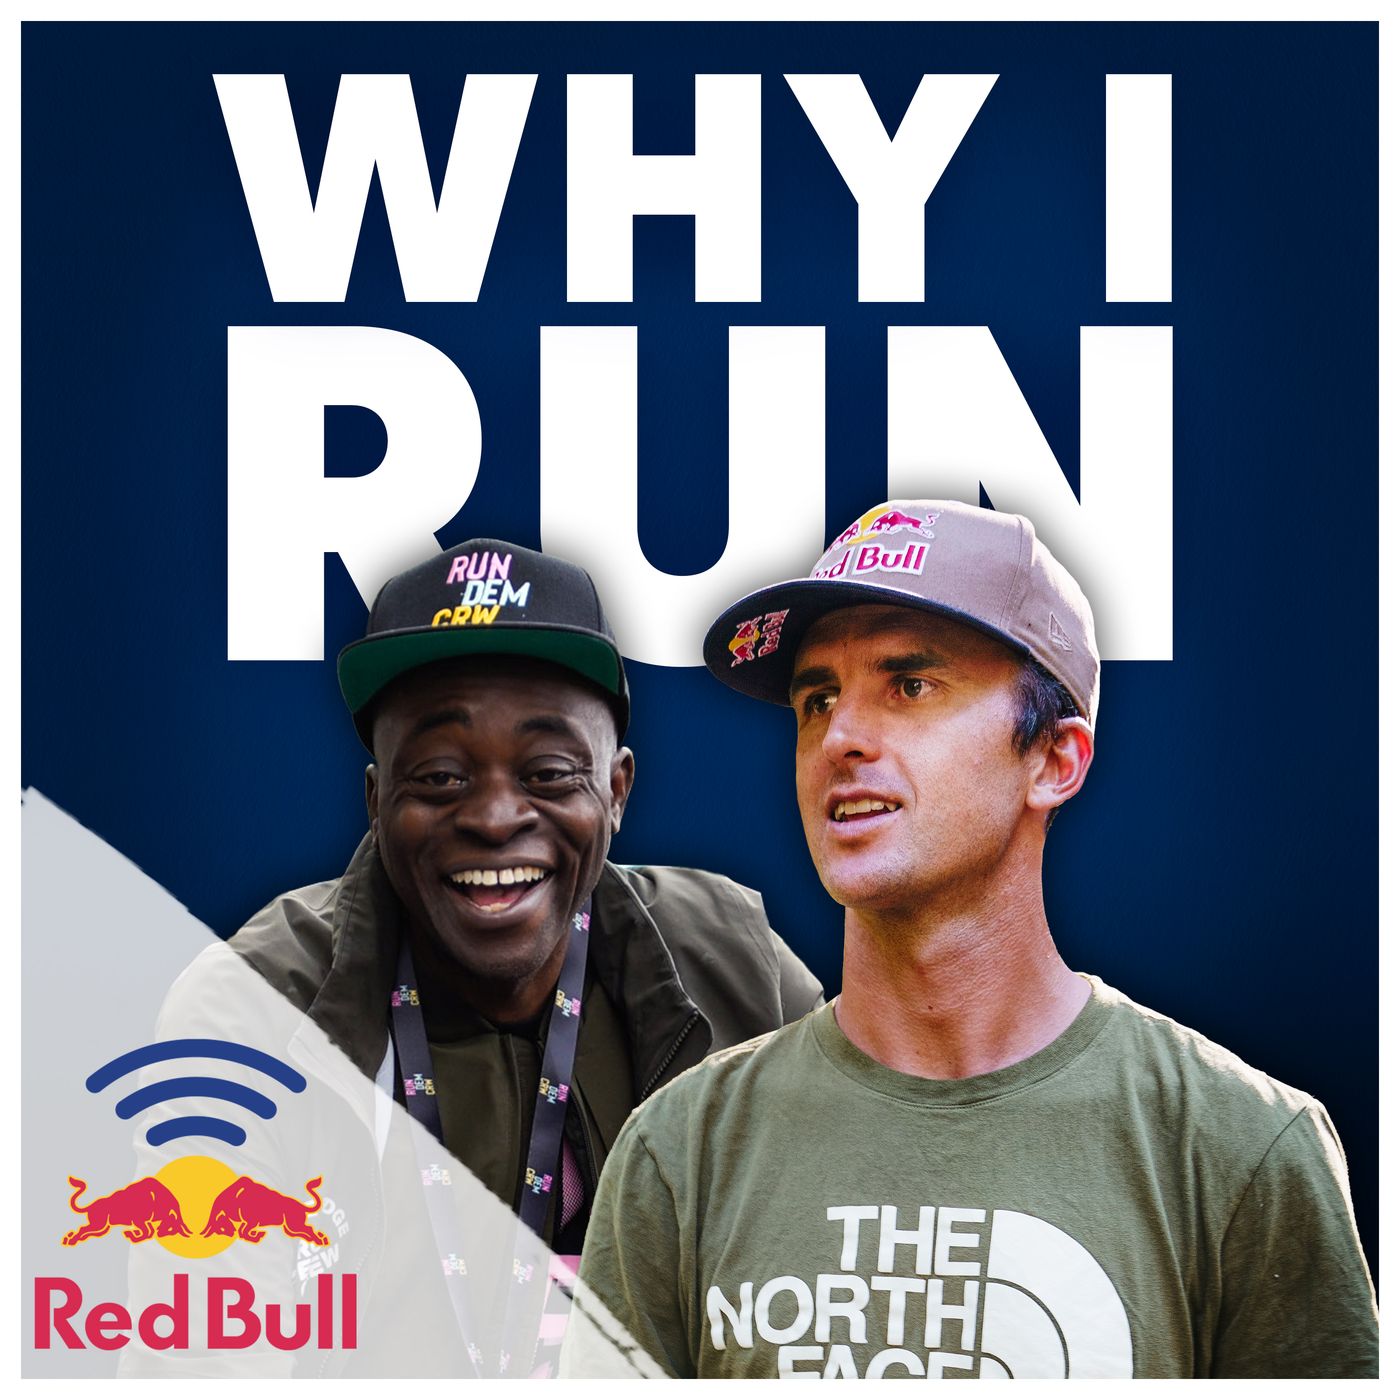 I run to feel part of a community with DJ Charlie Dark and ultrarunner Dylan Bowman